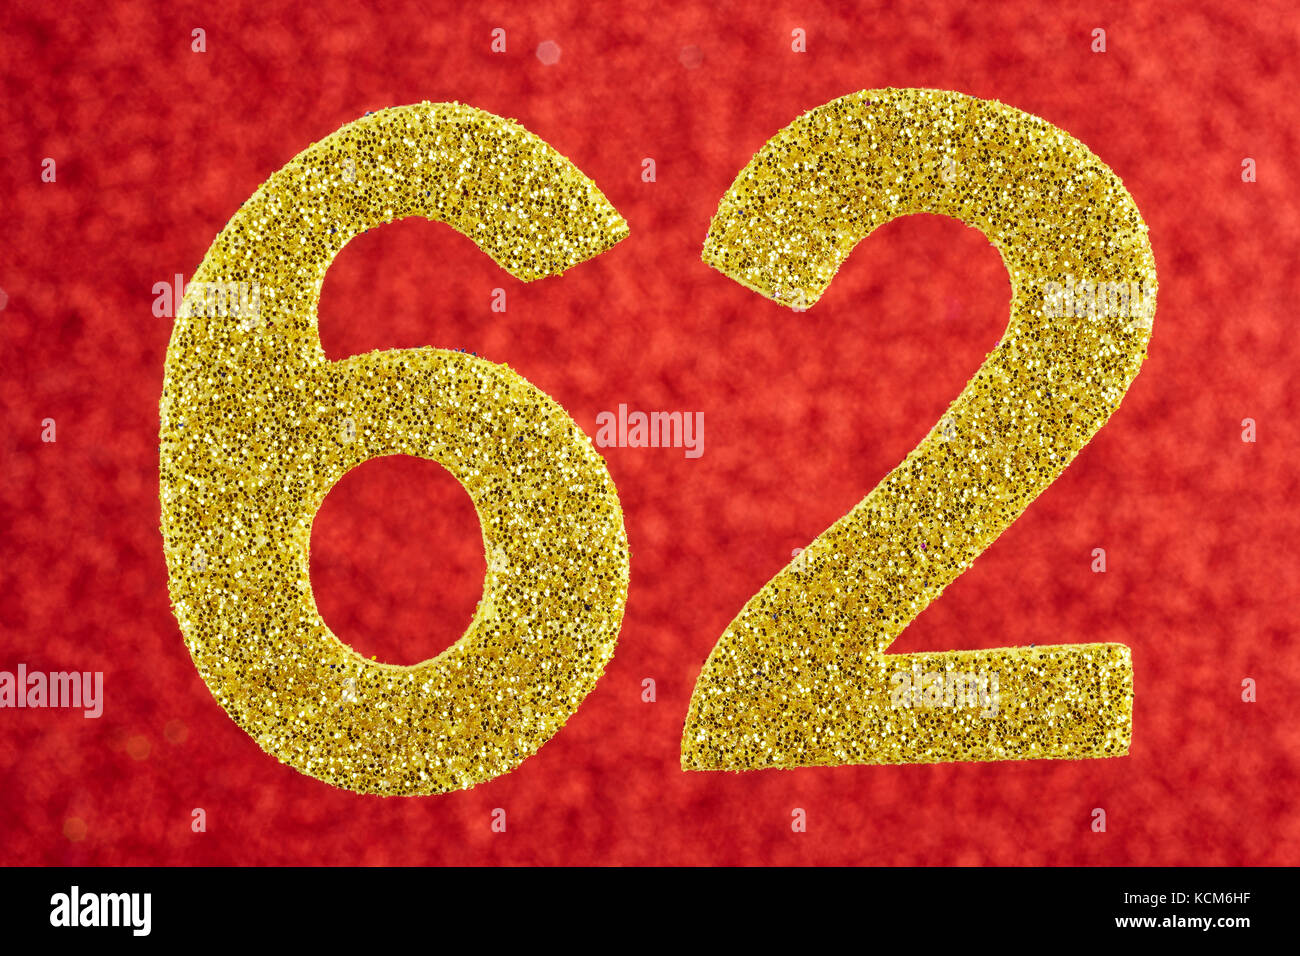 Number sixty-two golden color over a red background. Anniversary. Horizontal Stock Photo